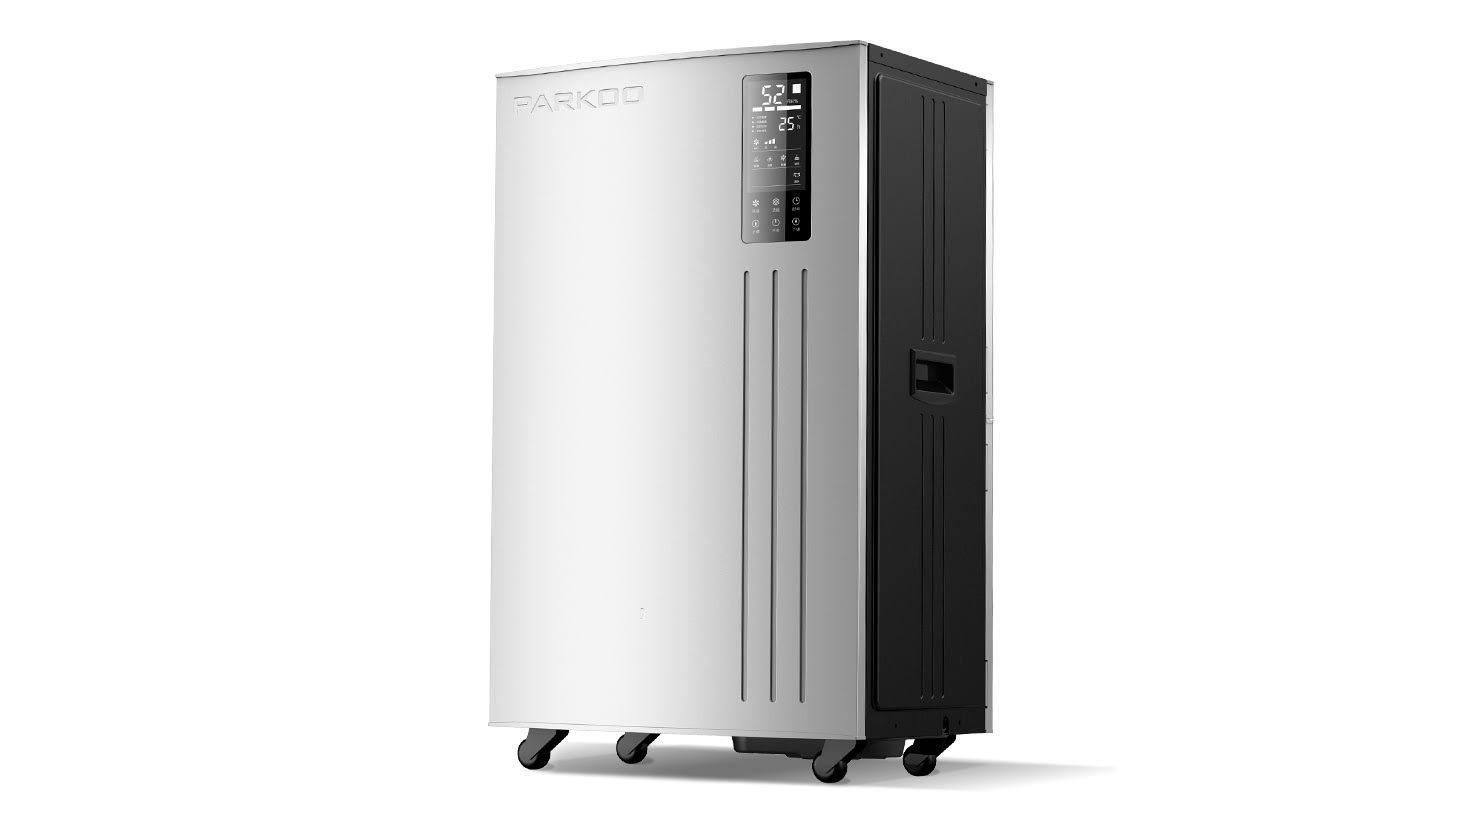 Guide for selection of new technology household appliances such as Dehumidifier